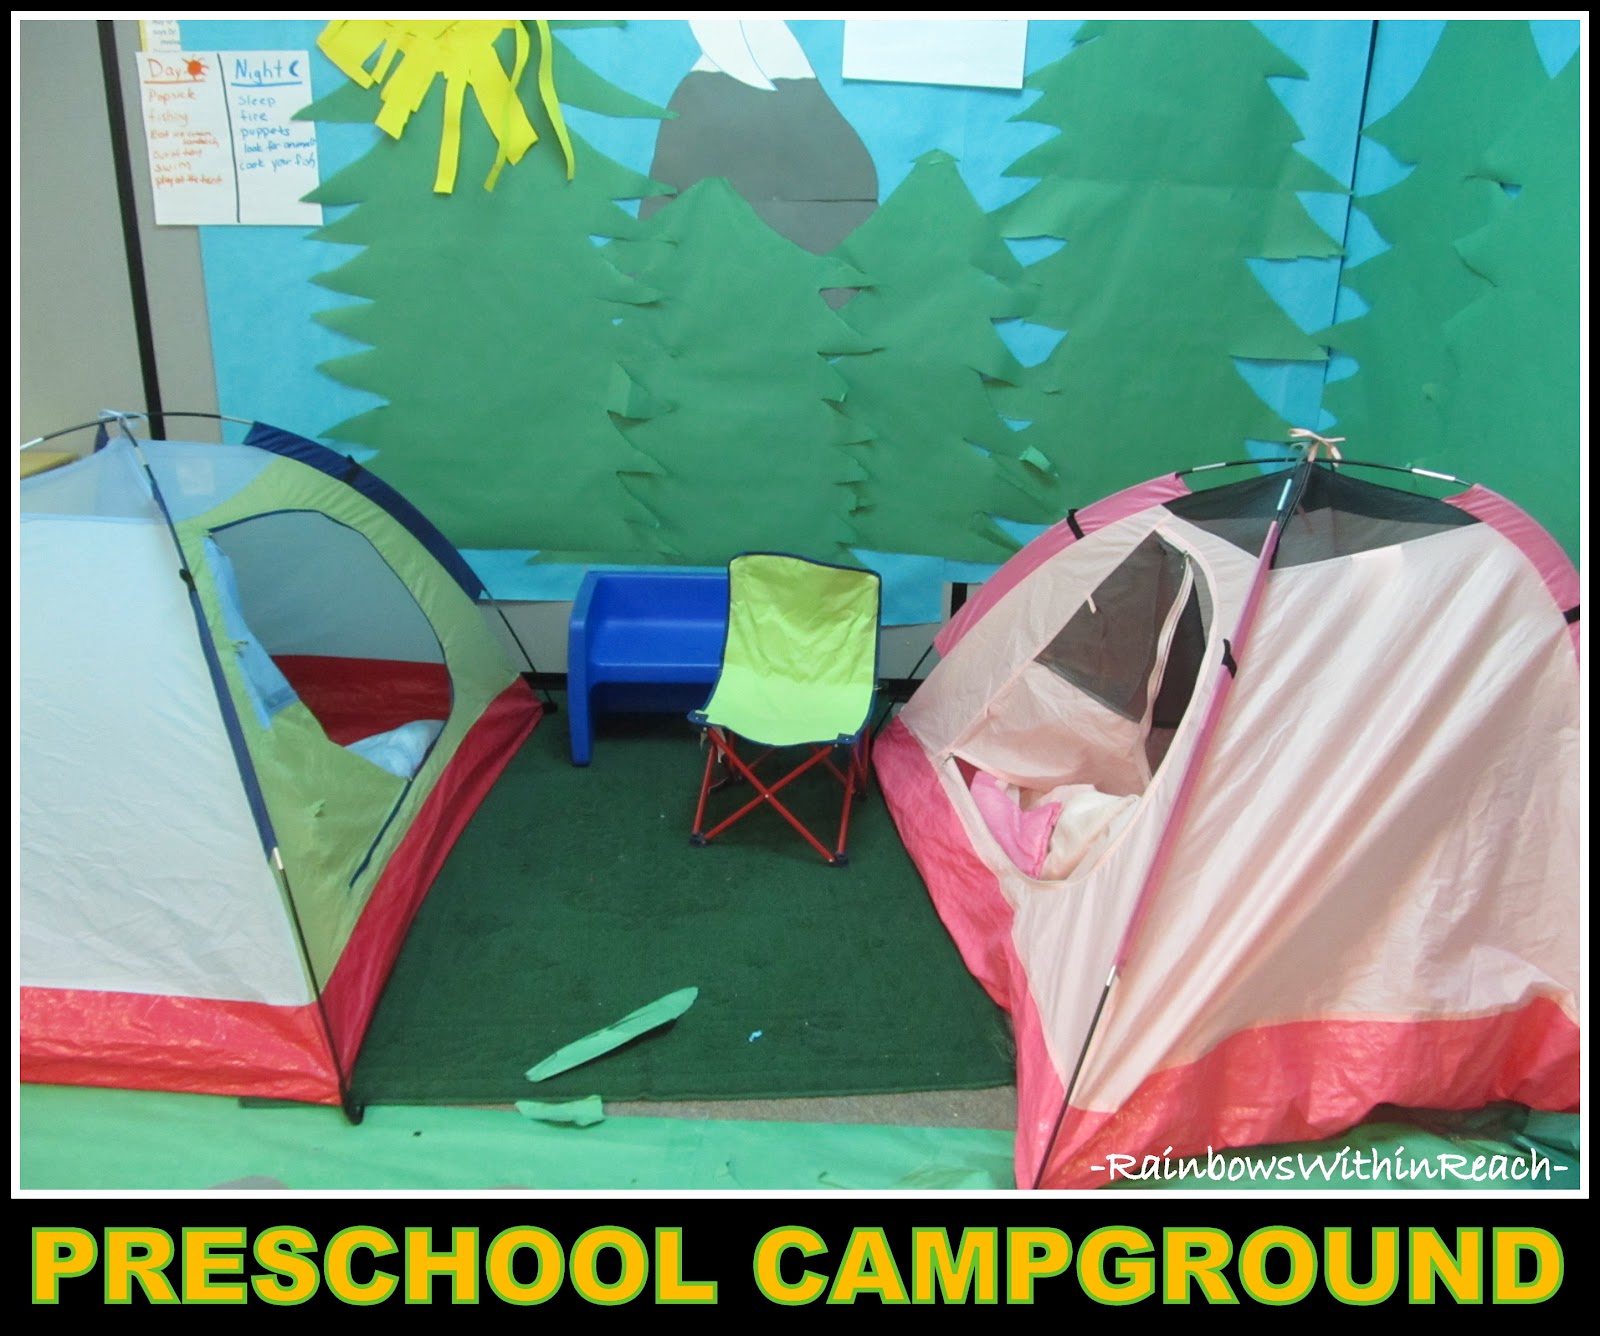 RainbowsWithinReach: "Camping" Campout at Preschool